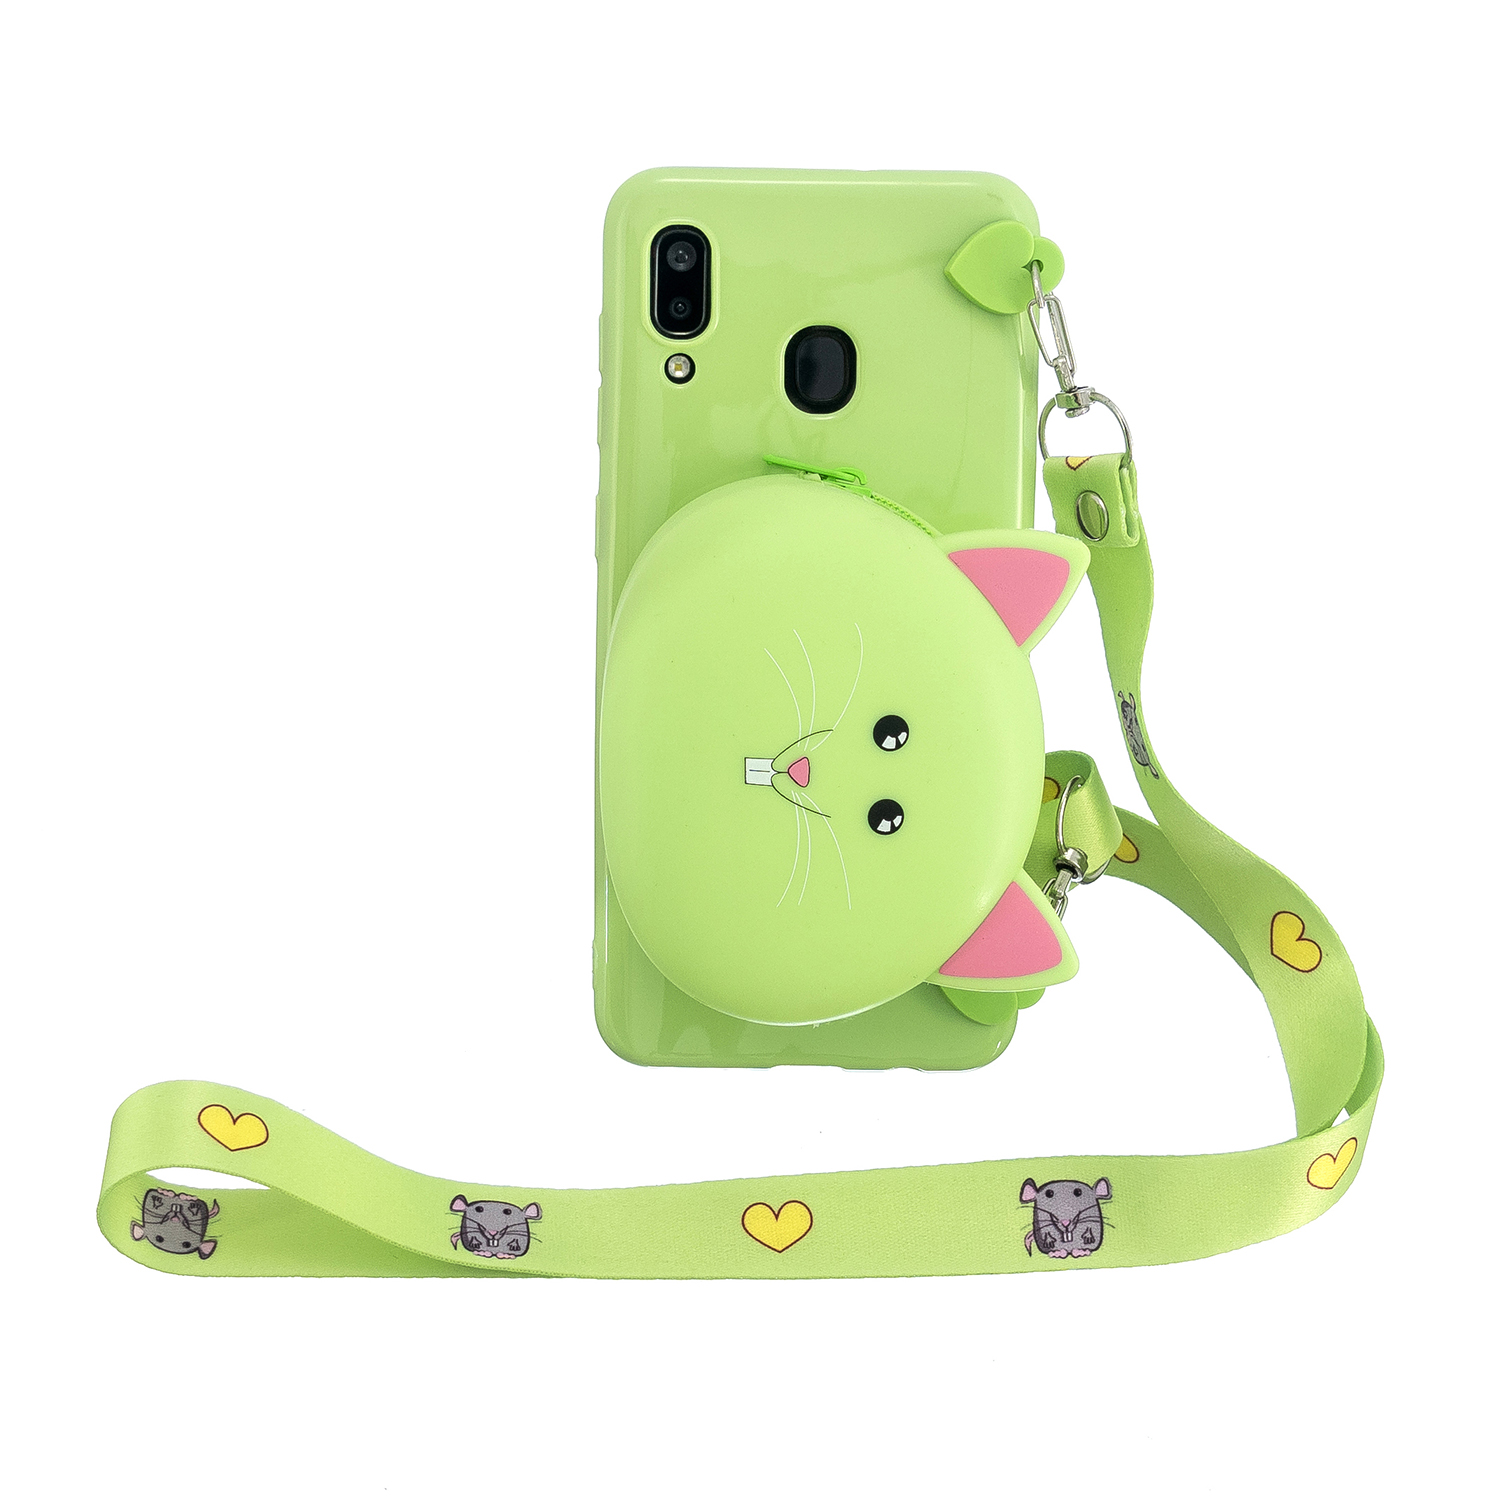 For Samsung A10/A20/A30 Case Mobile Phone Shell Shockproof TPU Cellphone Cover with Cartoon Cat Pig Panda Coin Purse Lovely Shoulder Starp  Green